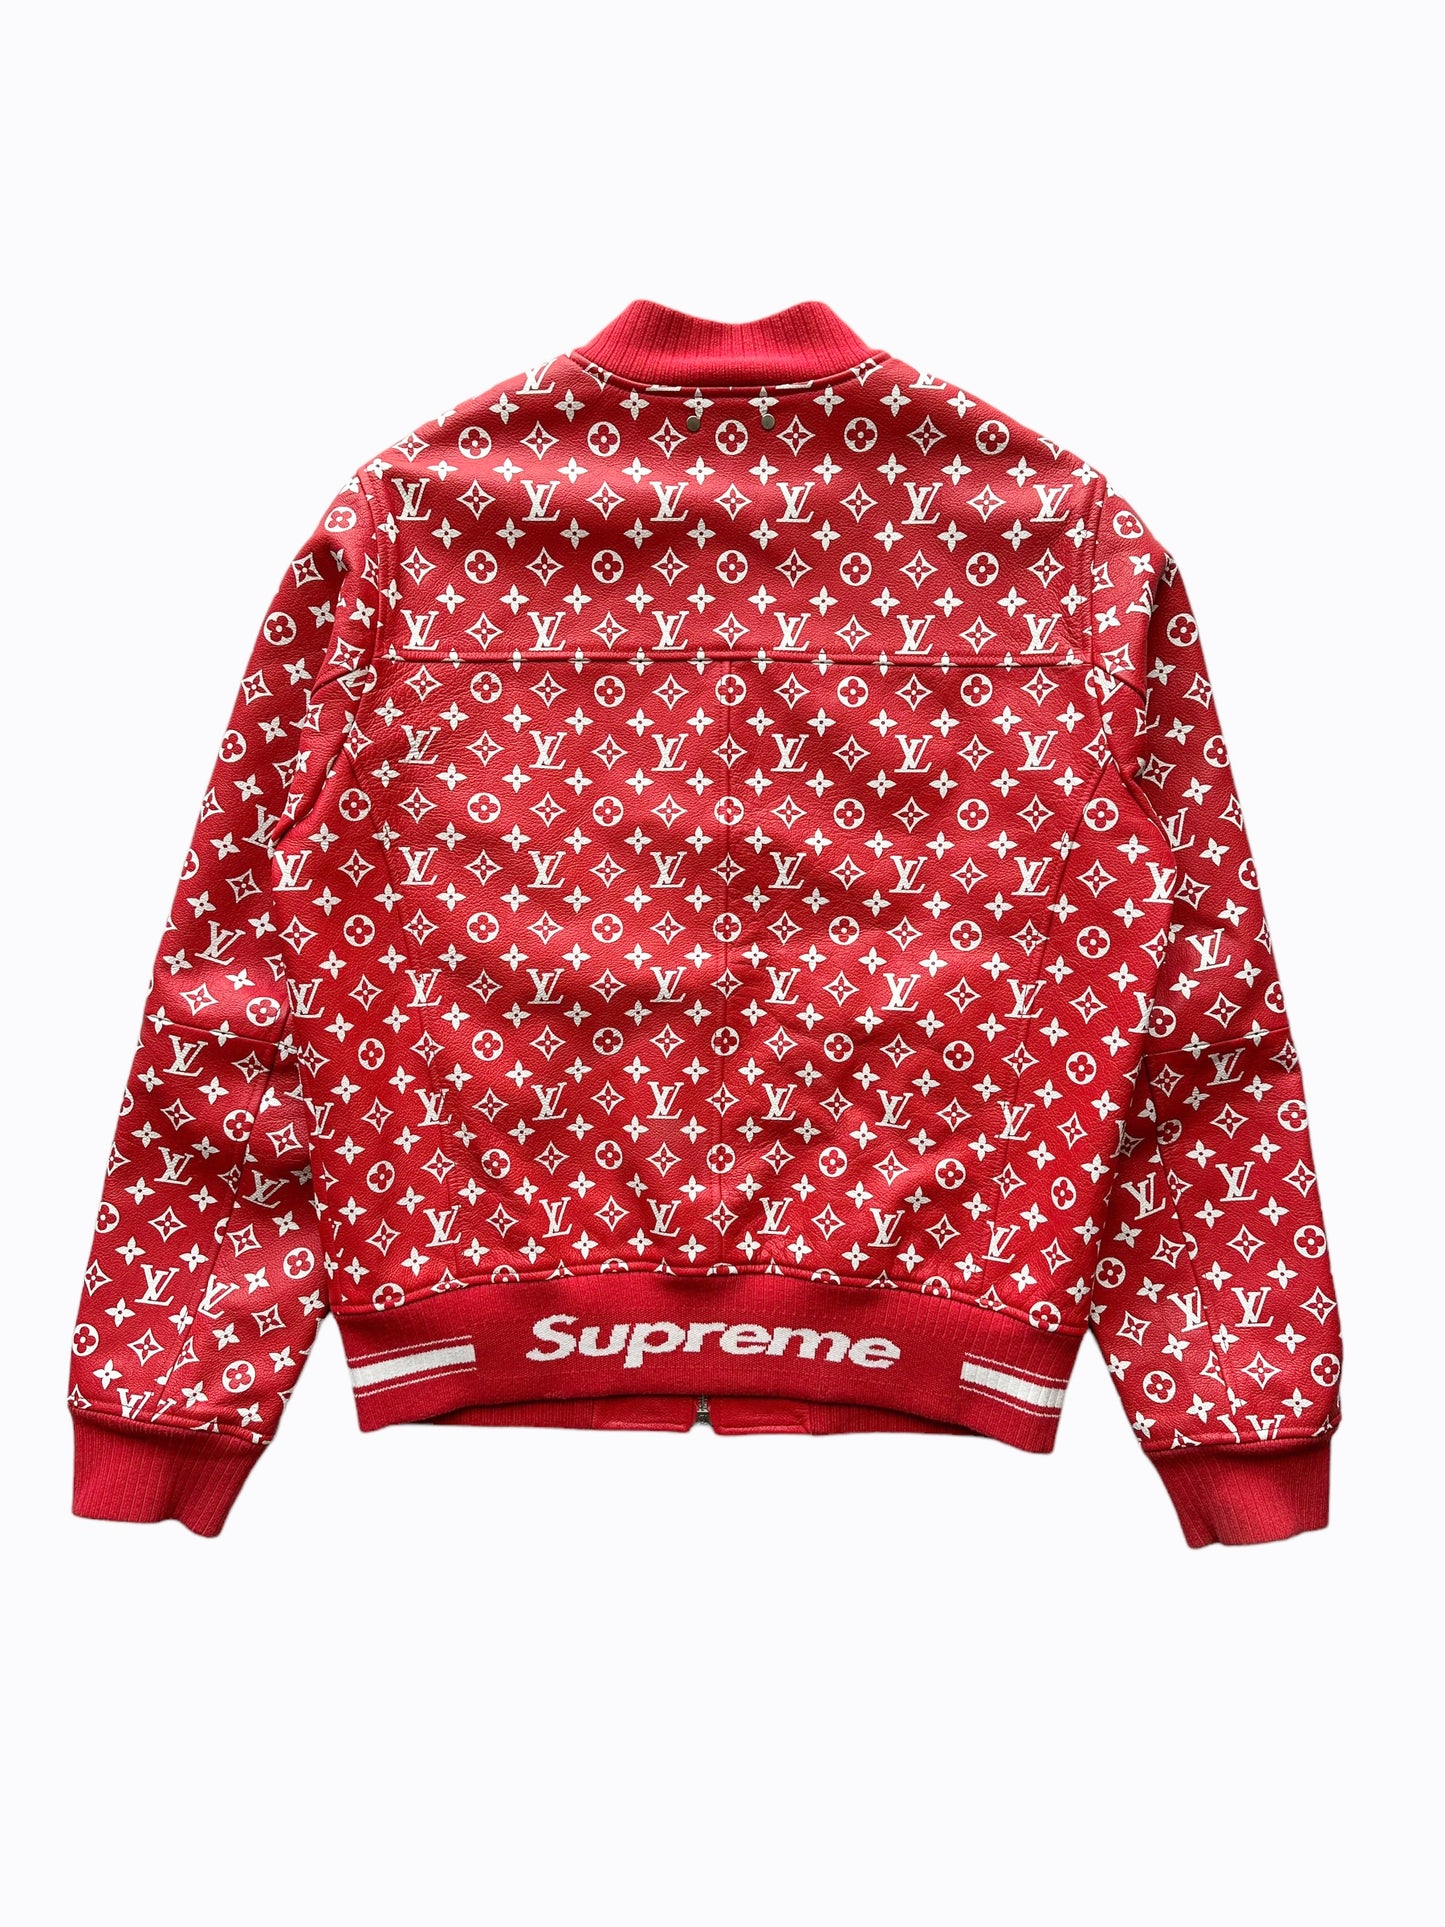 Supreme Louis Vuitton Red Monogram With Snoopy Varsity Jacket Coat Outwear  - Shop trending fashion in USA and EU